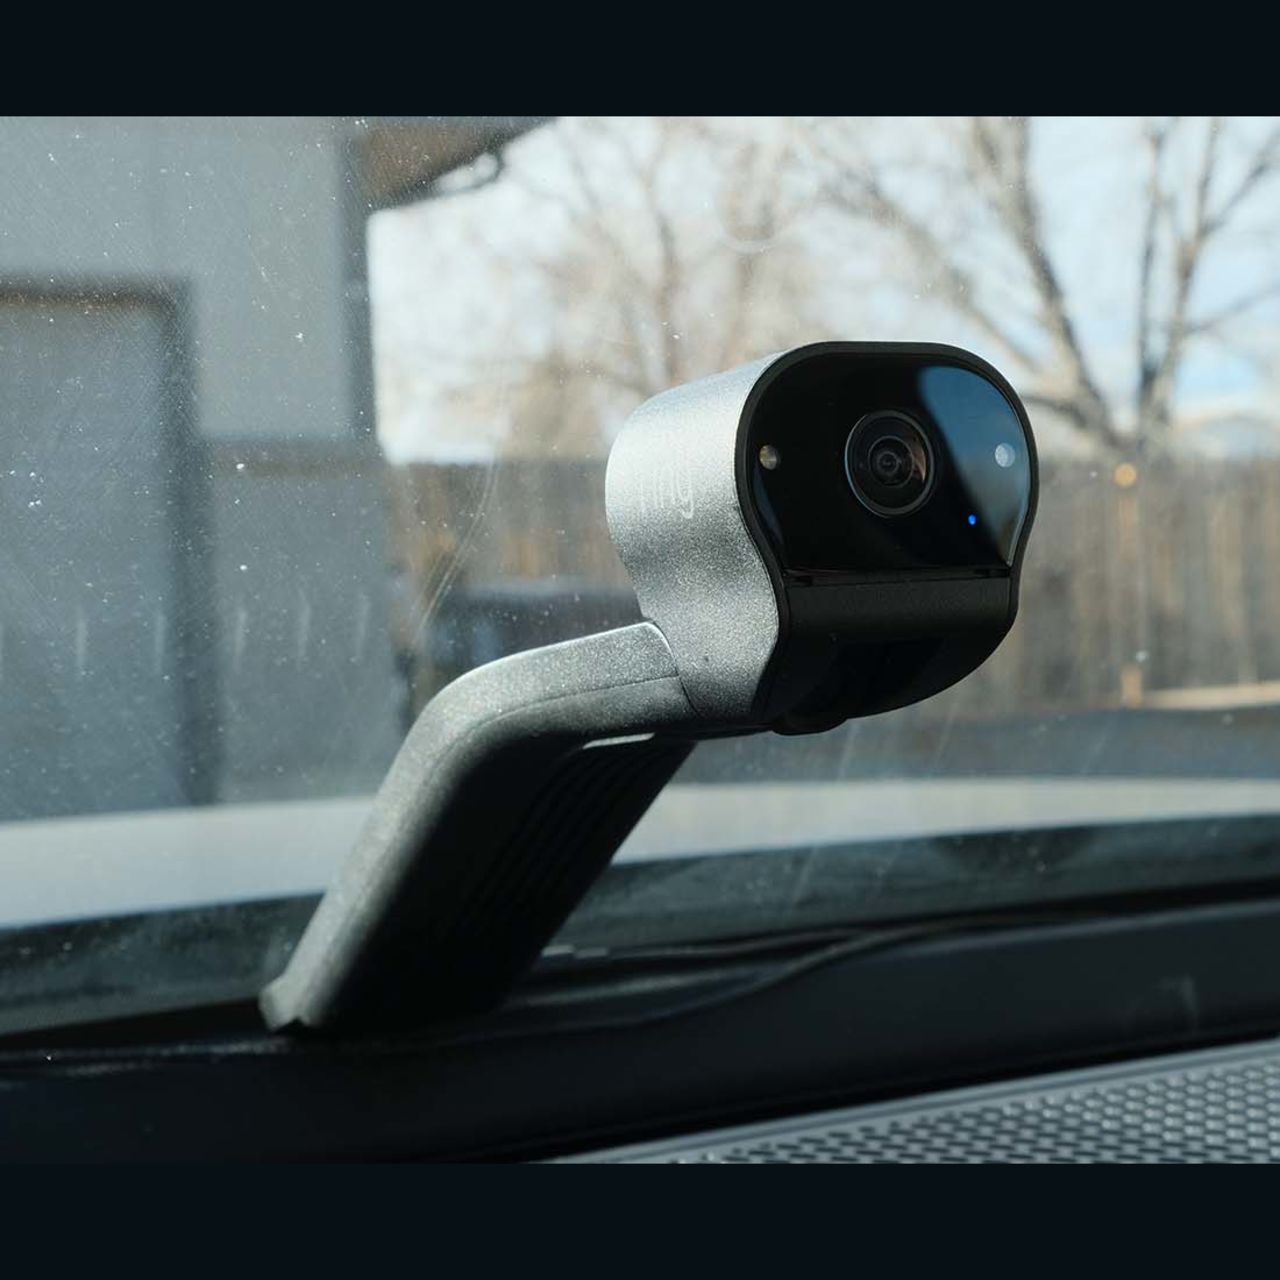 Ring finally debuts its in-car security camera